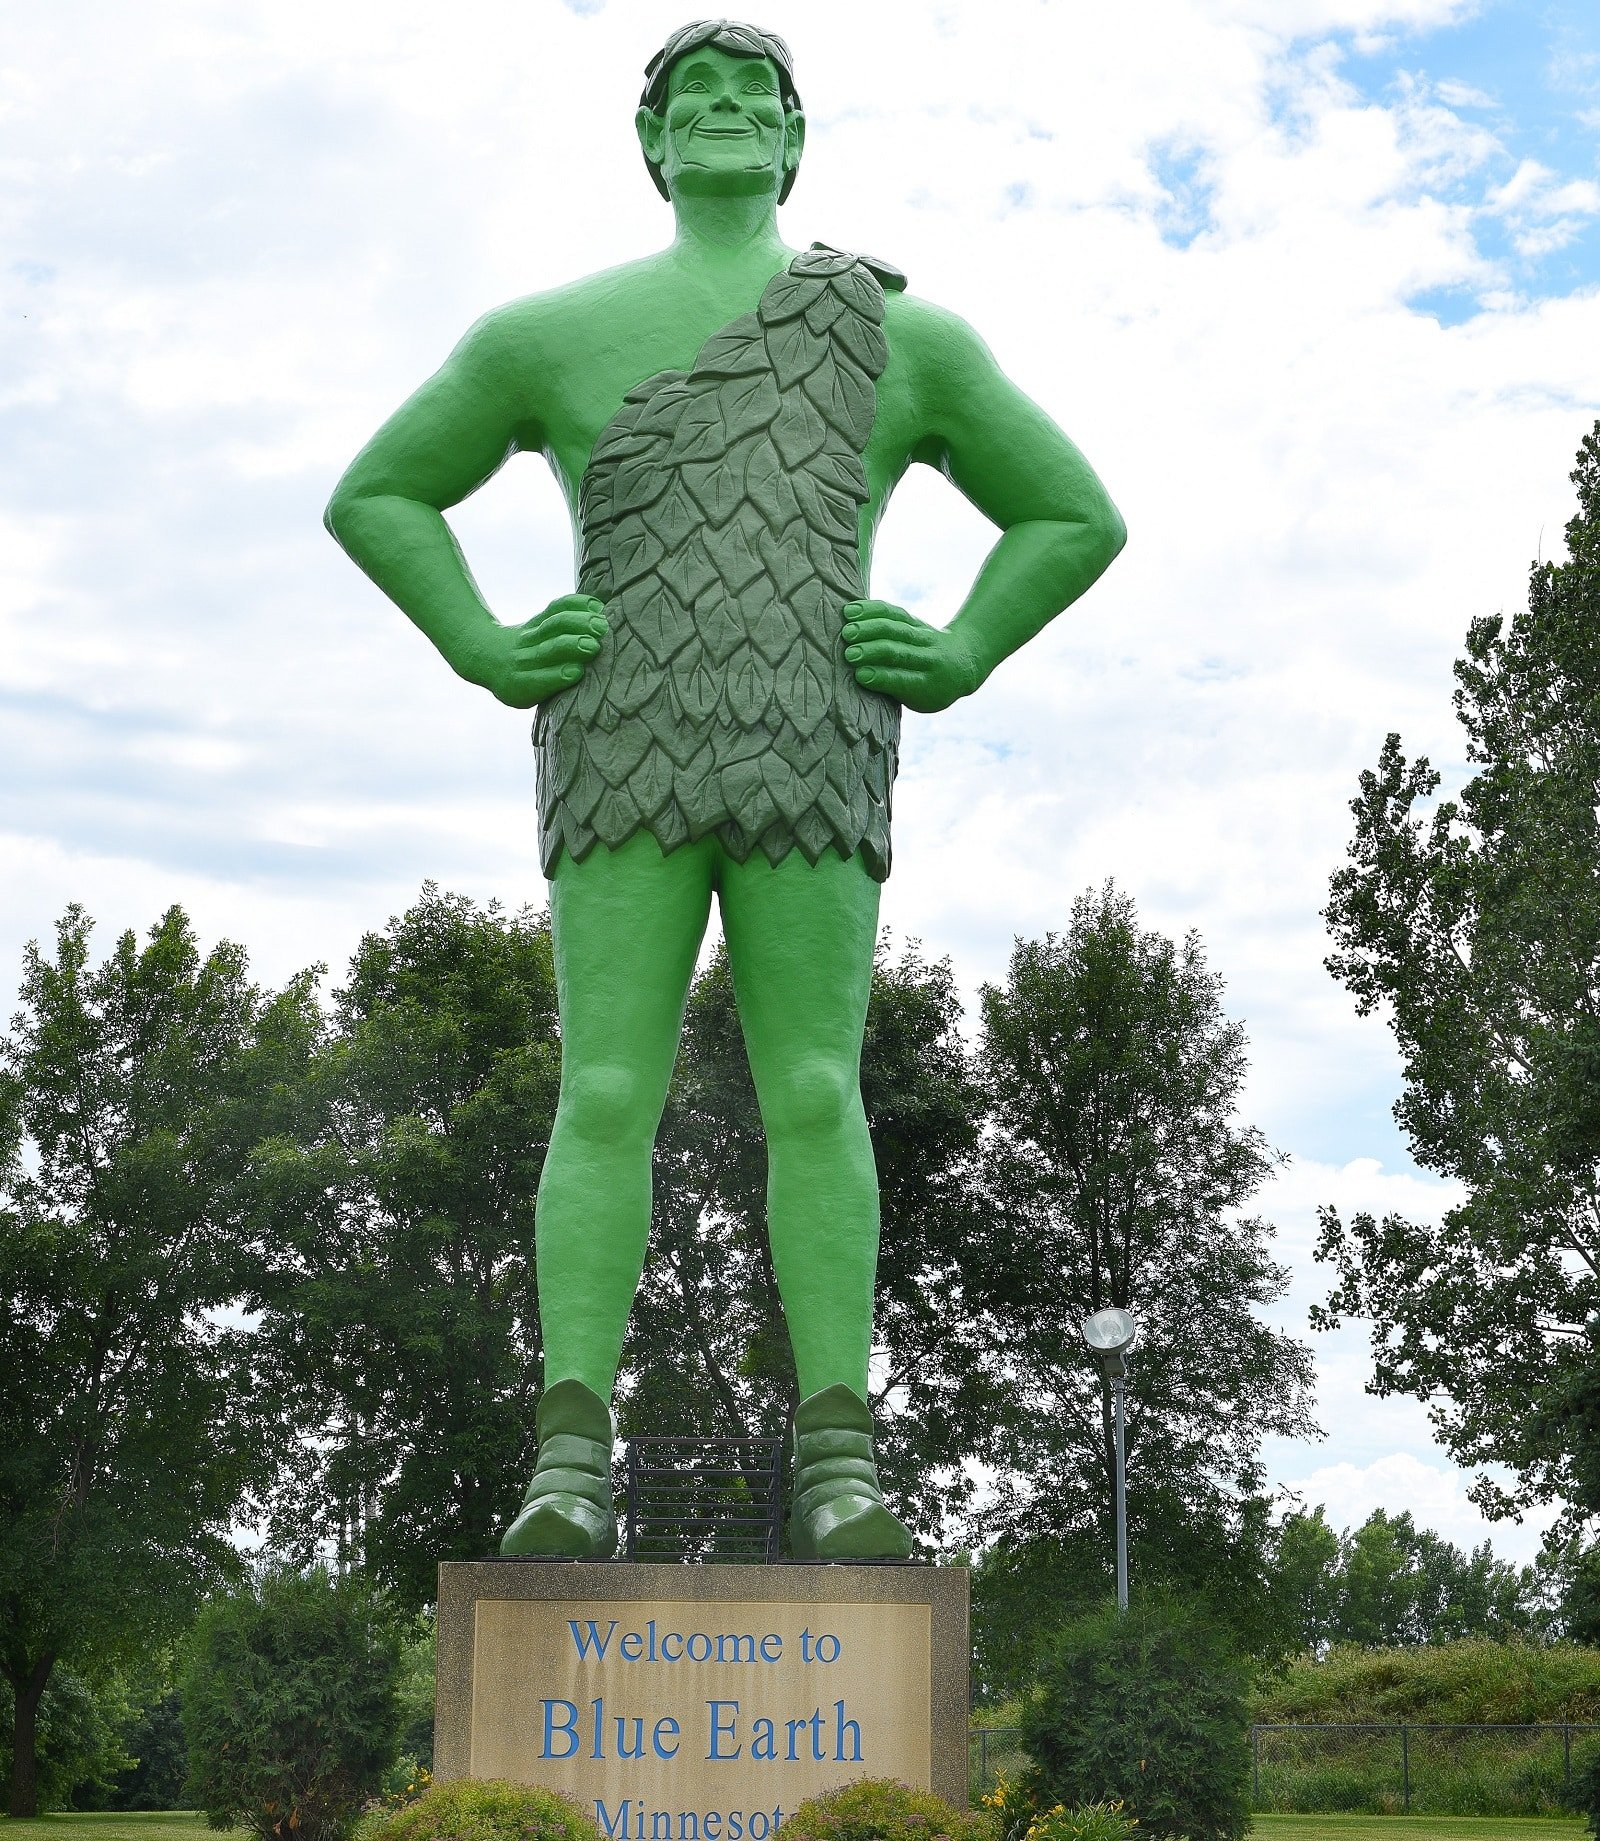 <p><span>The Jolly Green Giant statue in Blue Earth, Minnesota, is a towering homage to the Green Giant vegetable company. This 55-foot-tall statue of the iconic green mascot is a popular photo stop for travelers. The statue, with its friendly smile and welcoming pose, embodies the spirit of fun that characterizes many American roadside attractions. Nearby, the Green Giant Museum allows you to explore the history of the company and its famous figures.</span></p> <p><b>Insider’s Tip: </b><span>Visit the nearby Green Giant Museum to learn about the history of this iconic figure.</span></p> <p><b>When To Travel: </b><span>Accessible year-round, but summer is the best time for a visit.</span></p> <p><b>How To Get There: </b><span>Located just off I-90, at the intersection with Highway 169.</span></p>